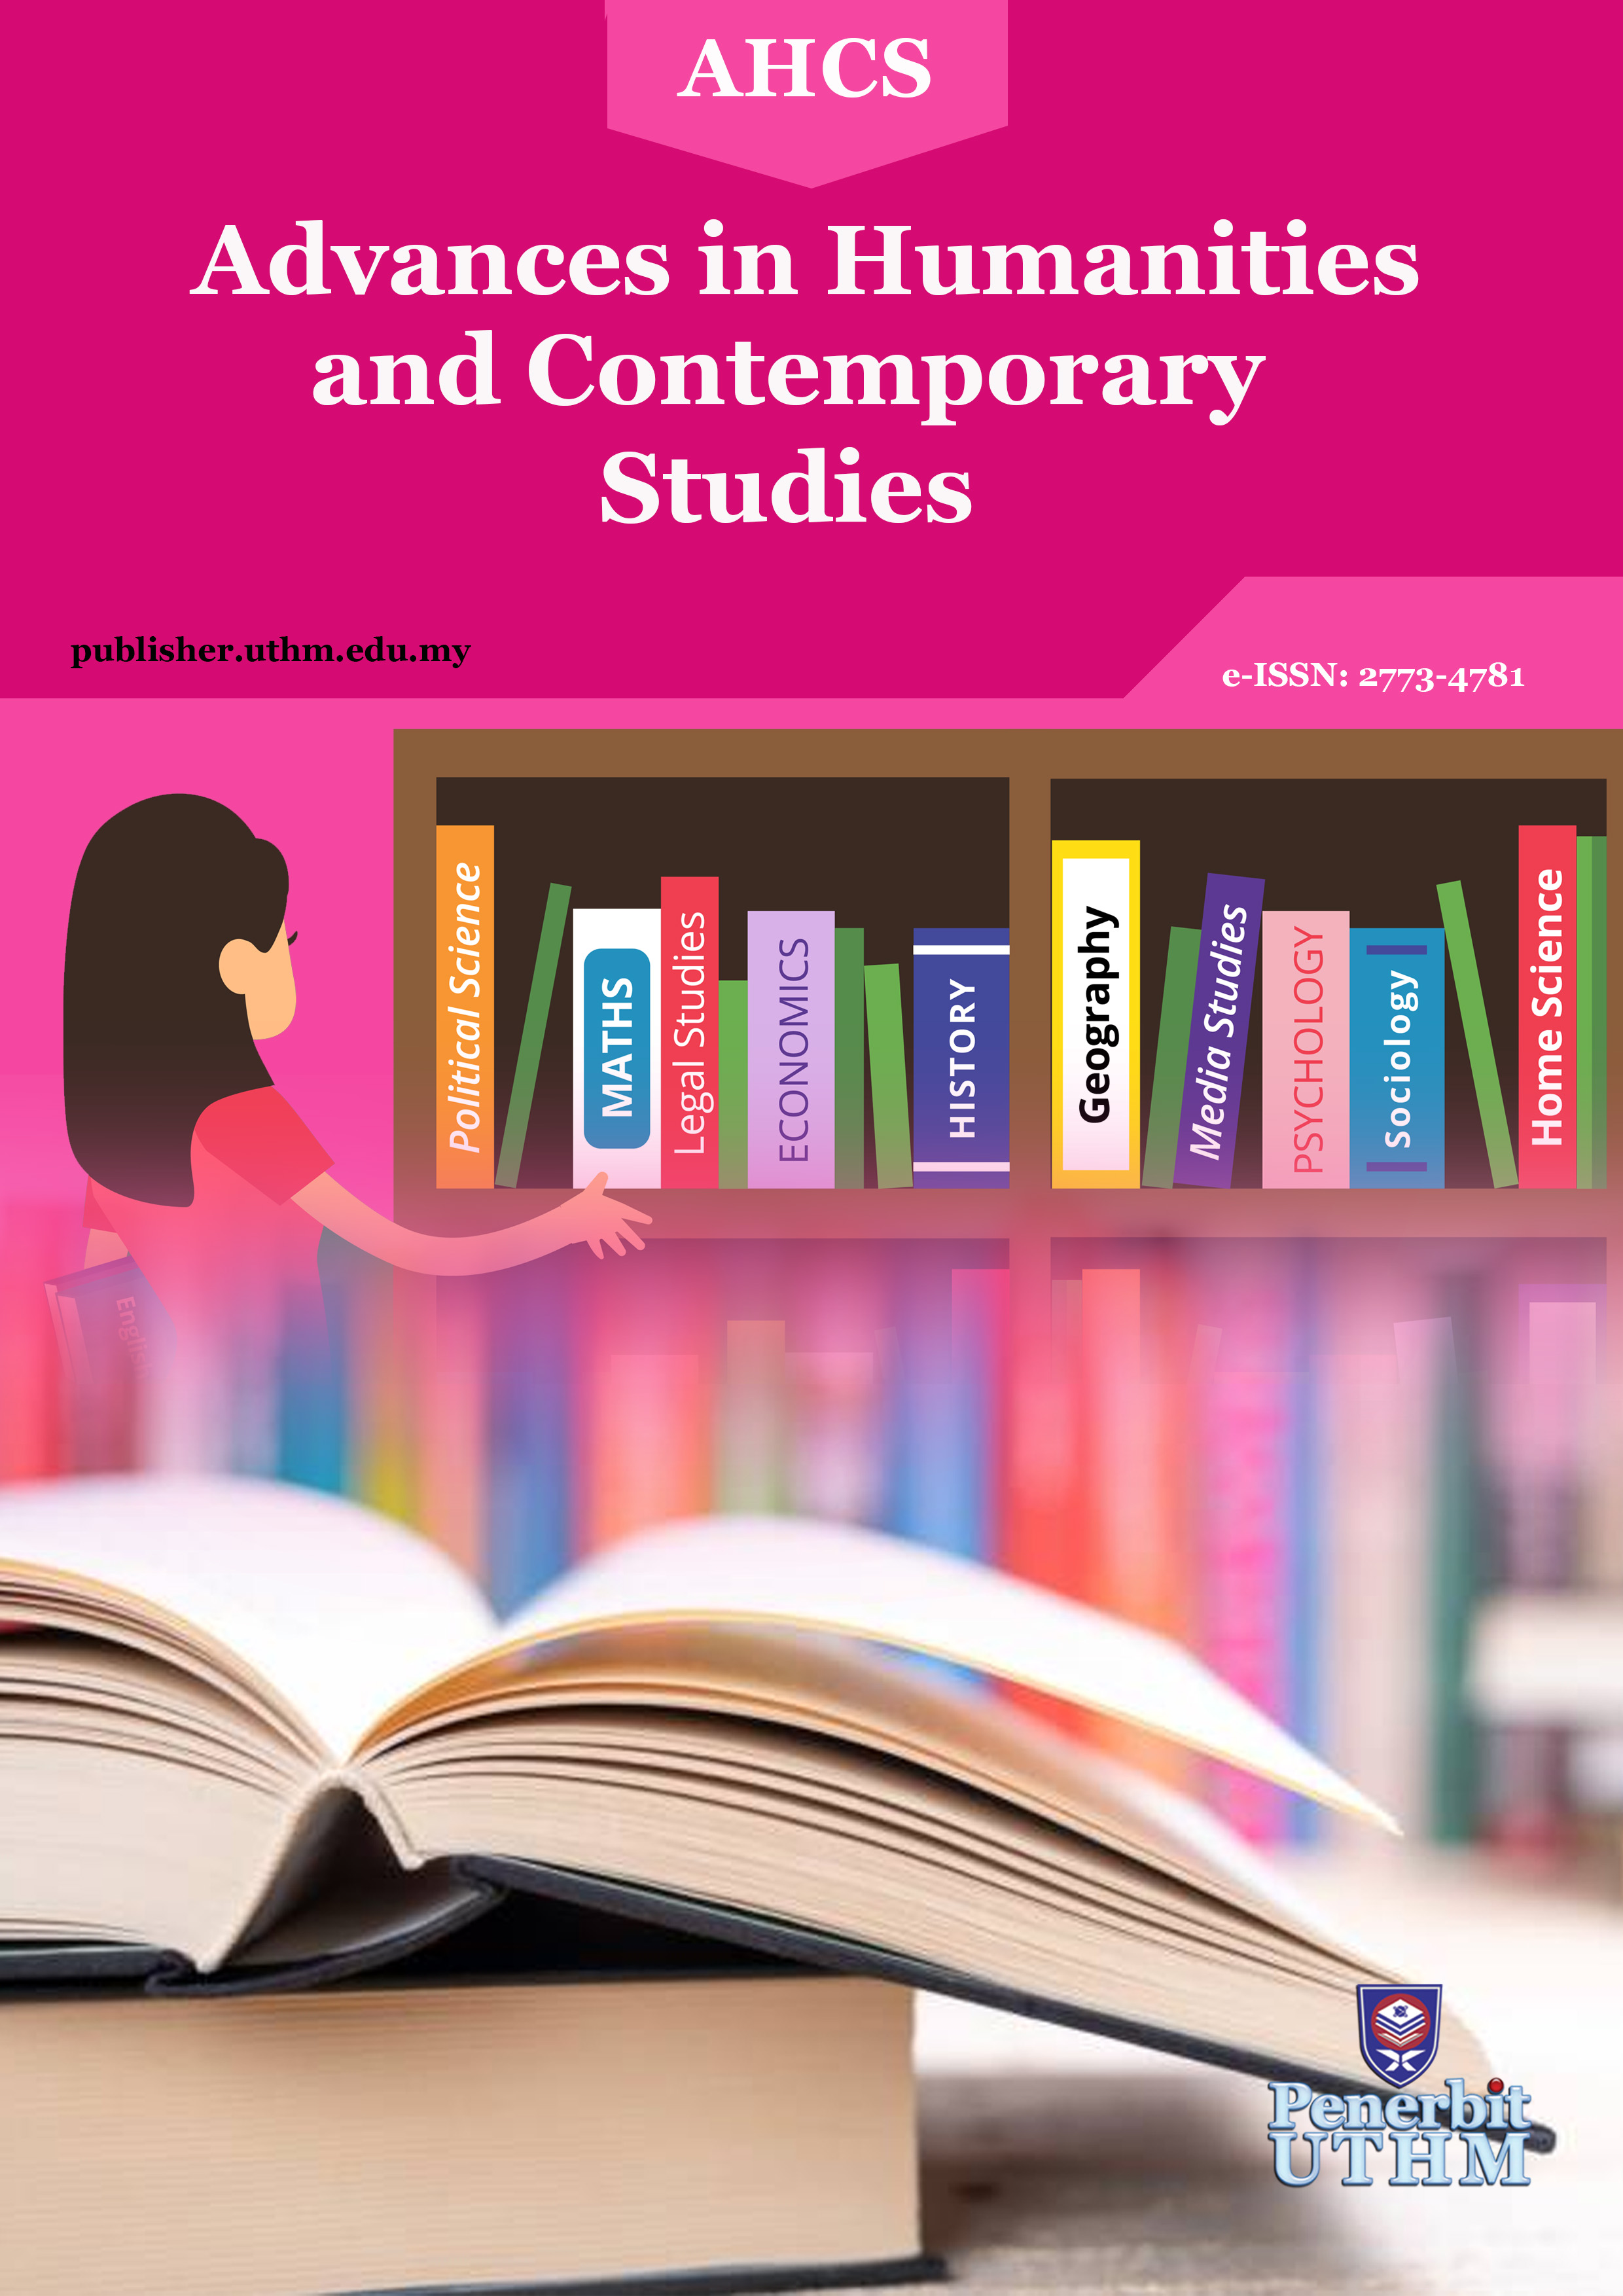 Advances in Humanities and Contemporary Studies